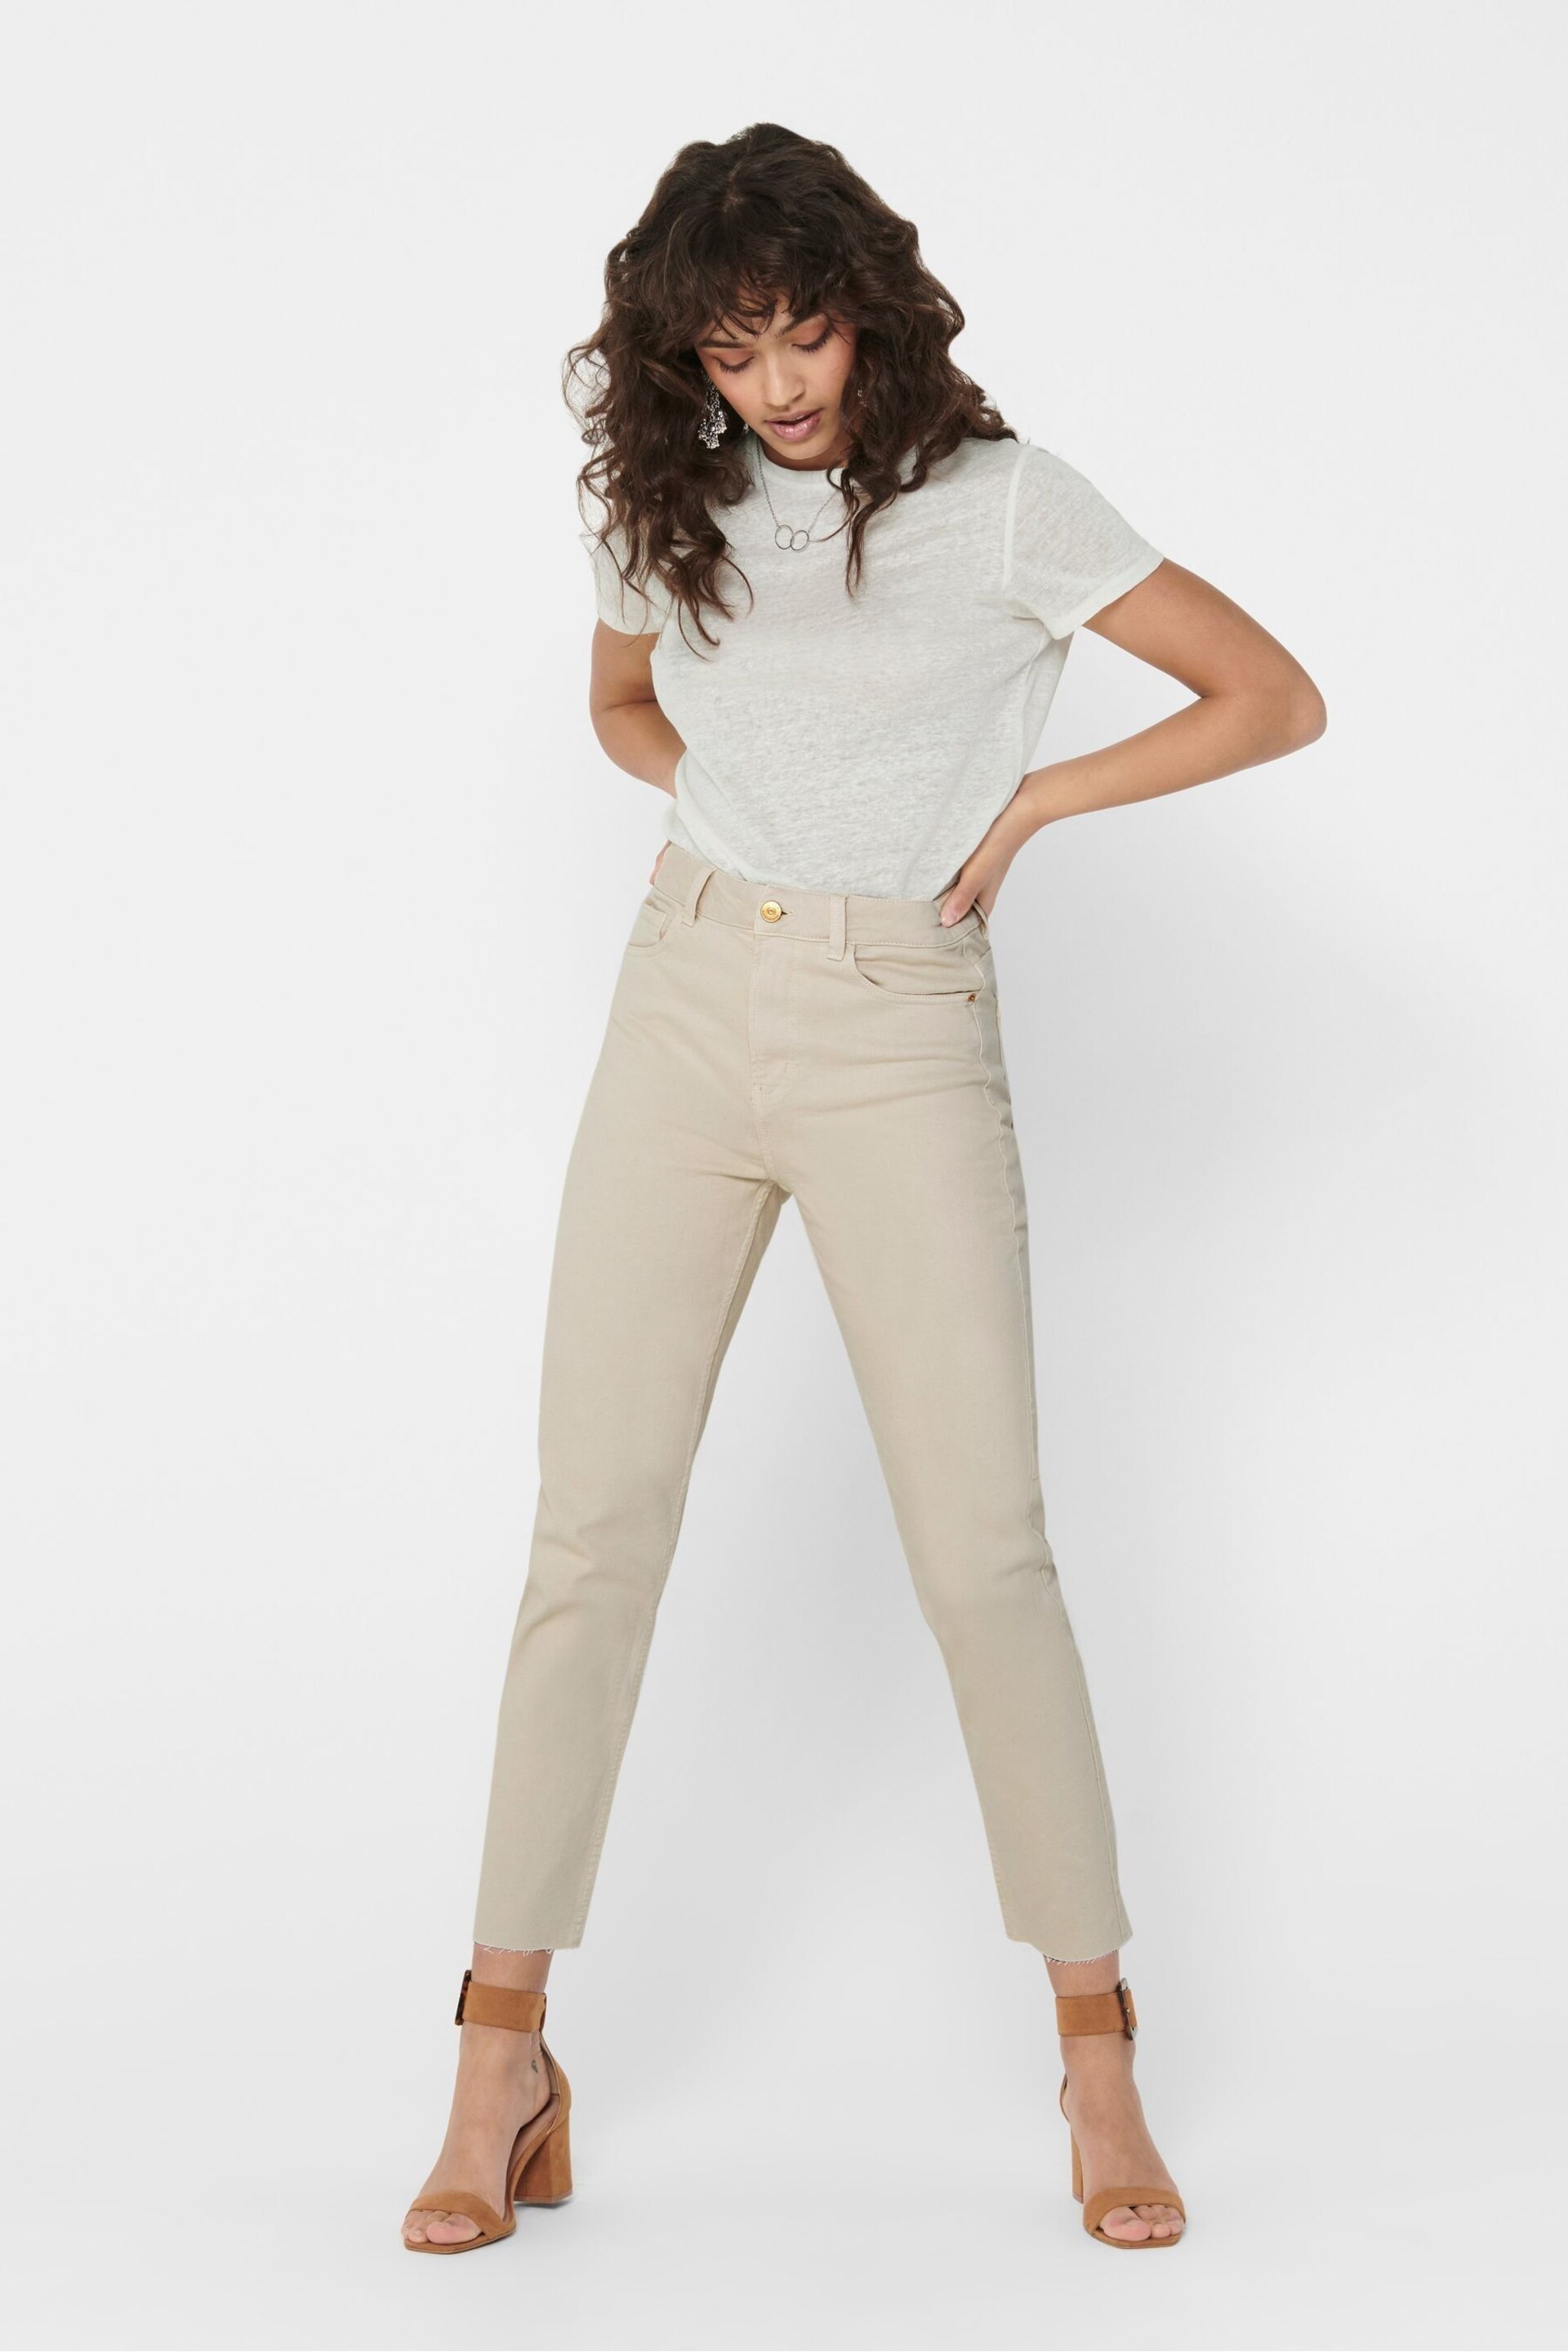 ONLY Ecru High Waist Raw Edge Mom Jeans - Image 2 of 5